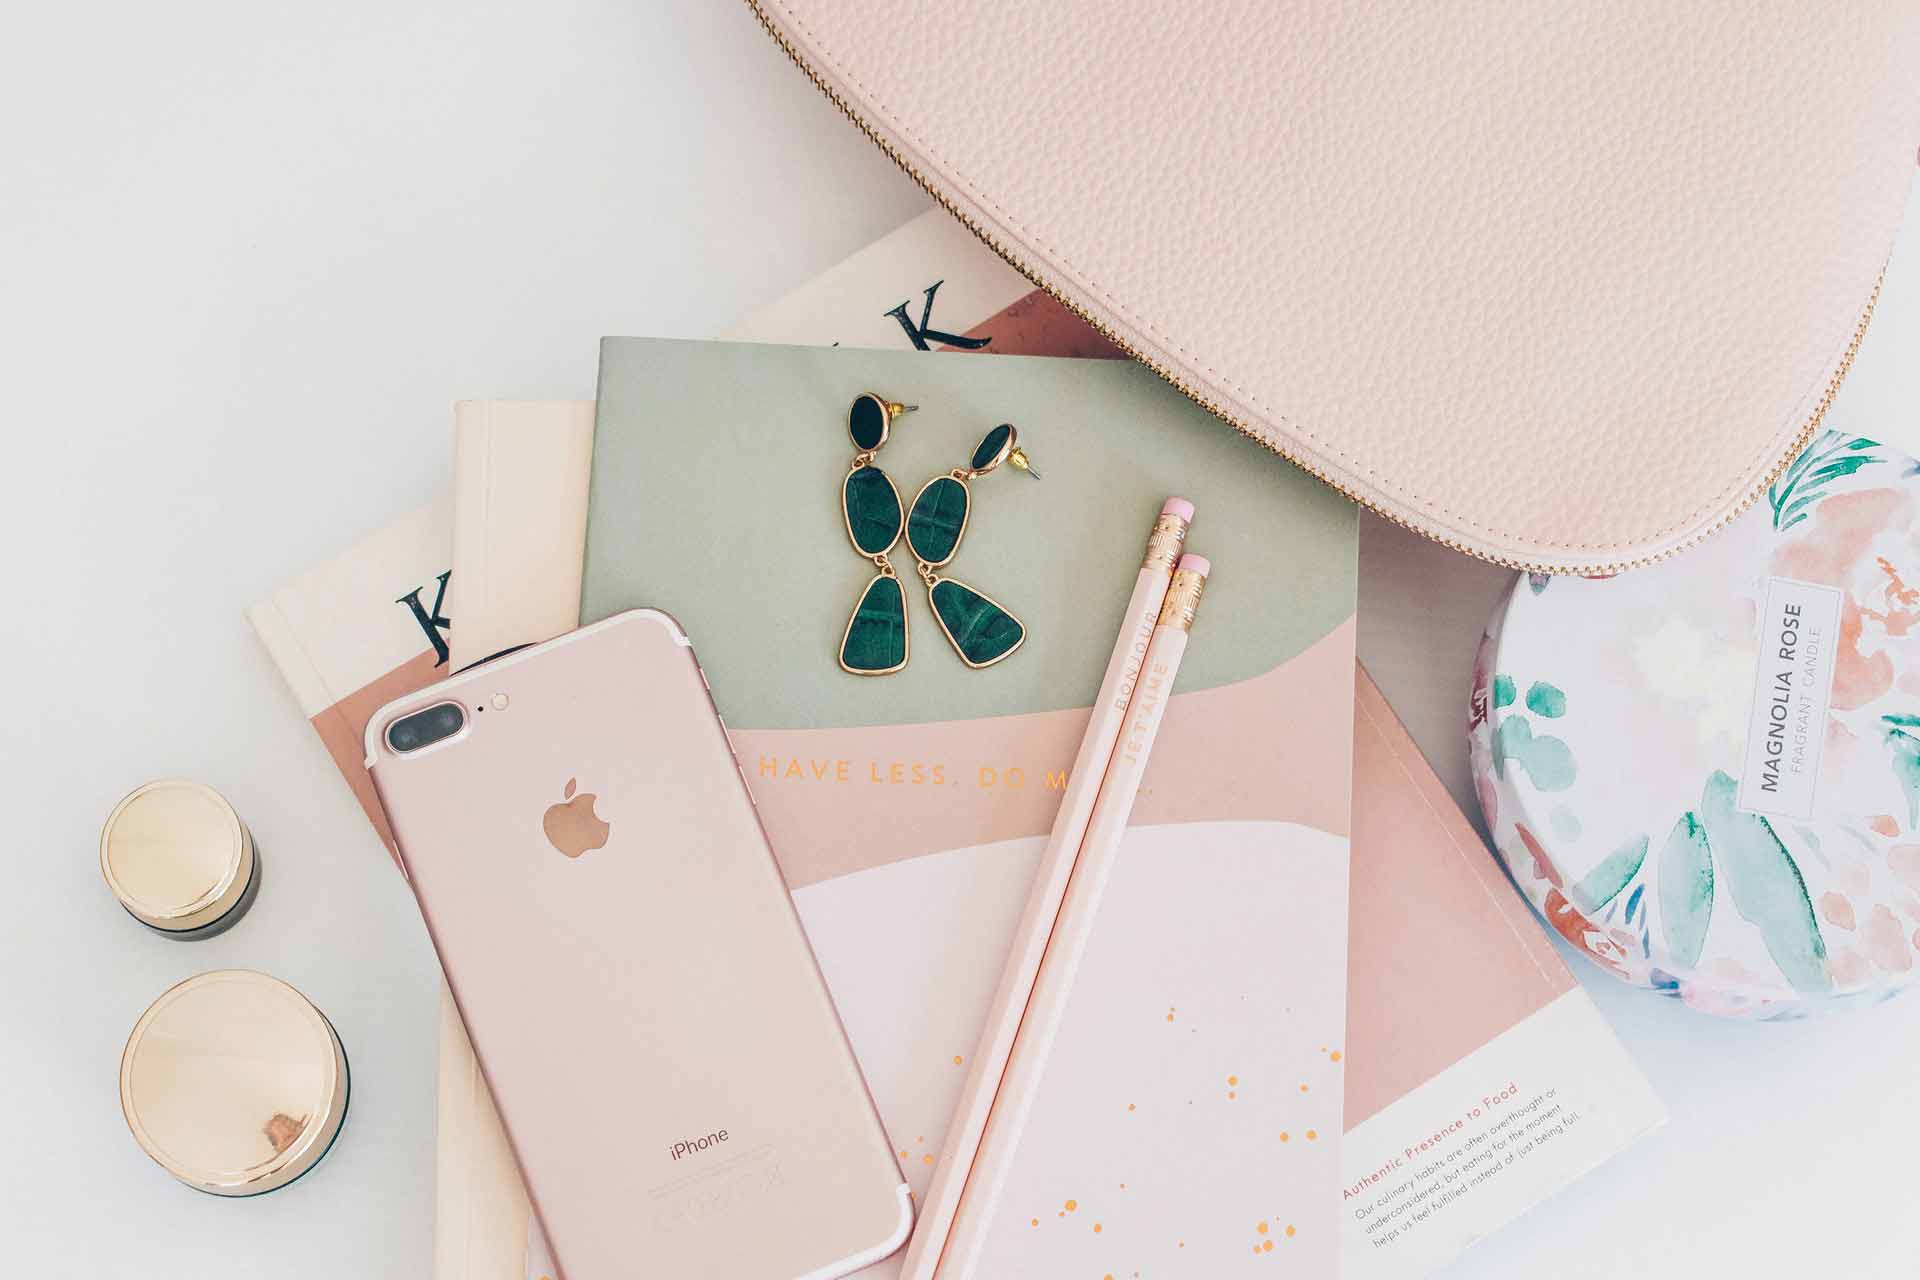 rose-gold-iphone-7-plus-beside-pencils-on-book-2897035